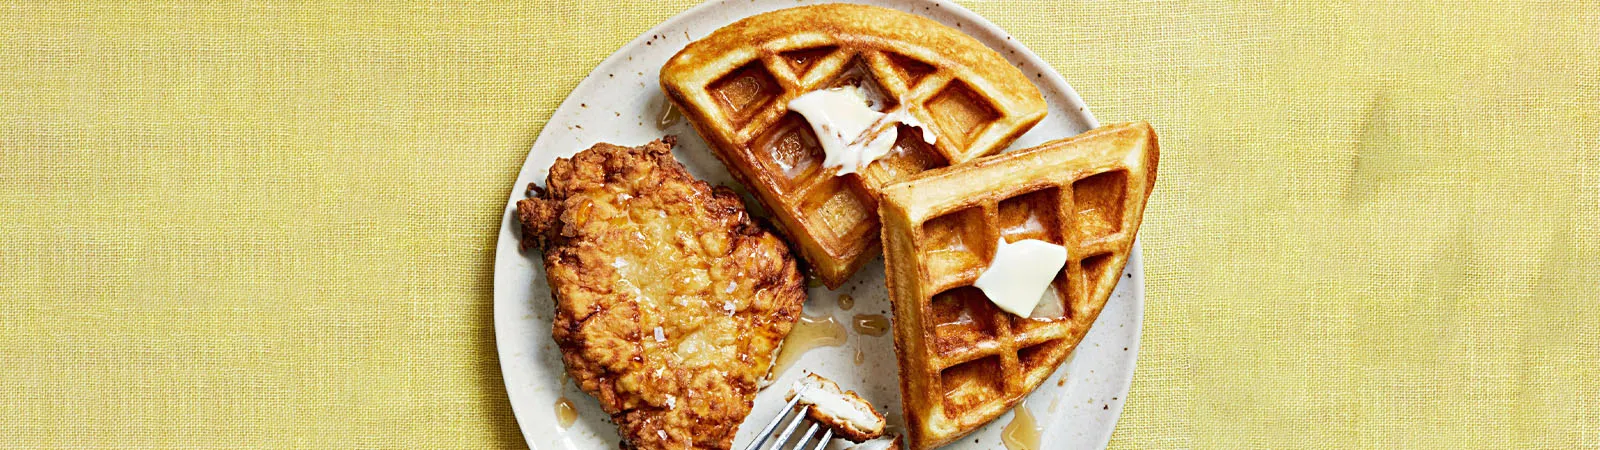 #10 Fried Chicken and Waffles re swized image